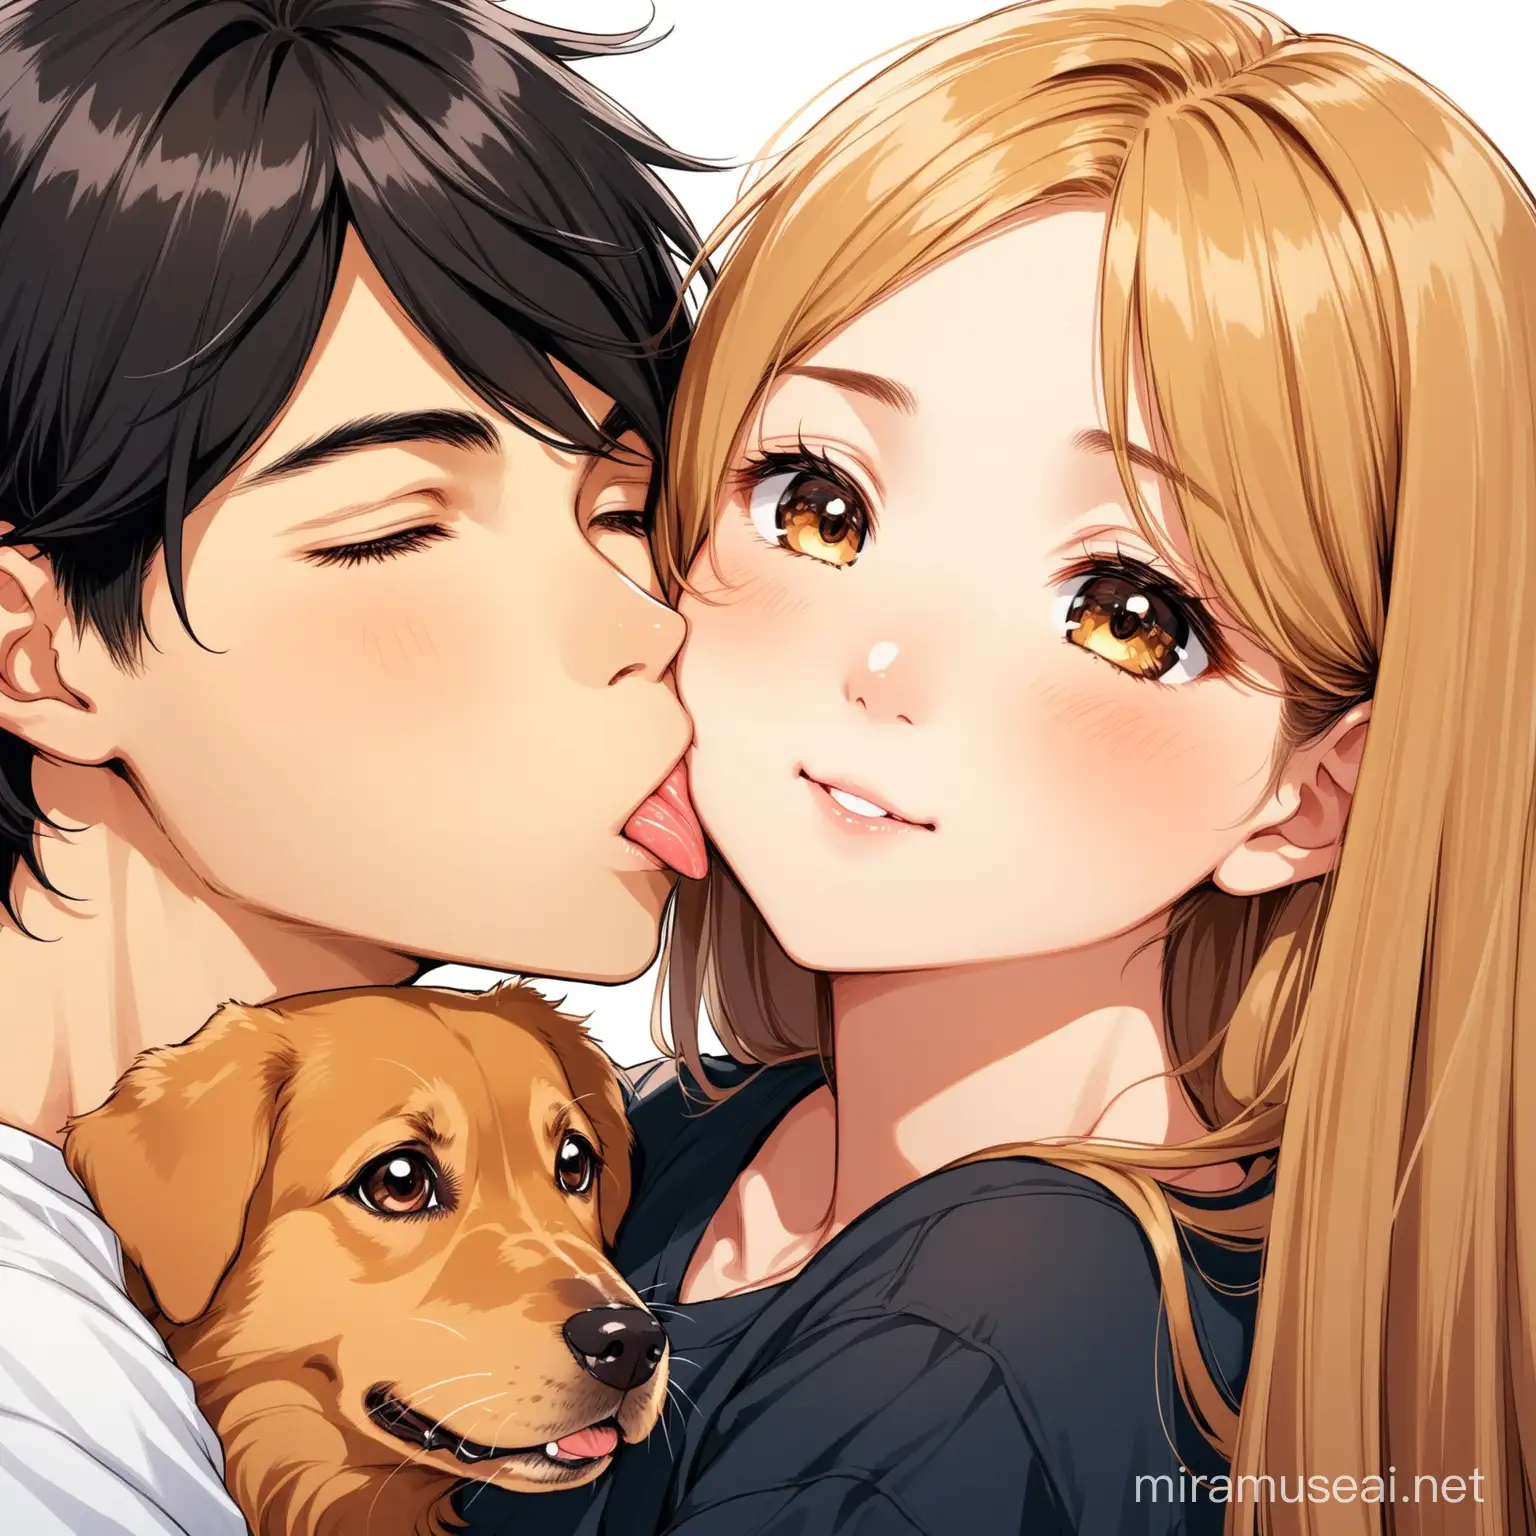 Affectionate Teen Girl with Boy and Dog Sharing Cheek Kisses